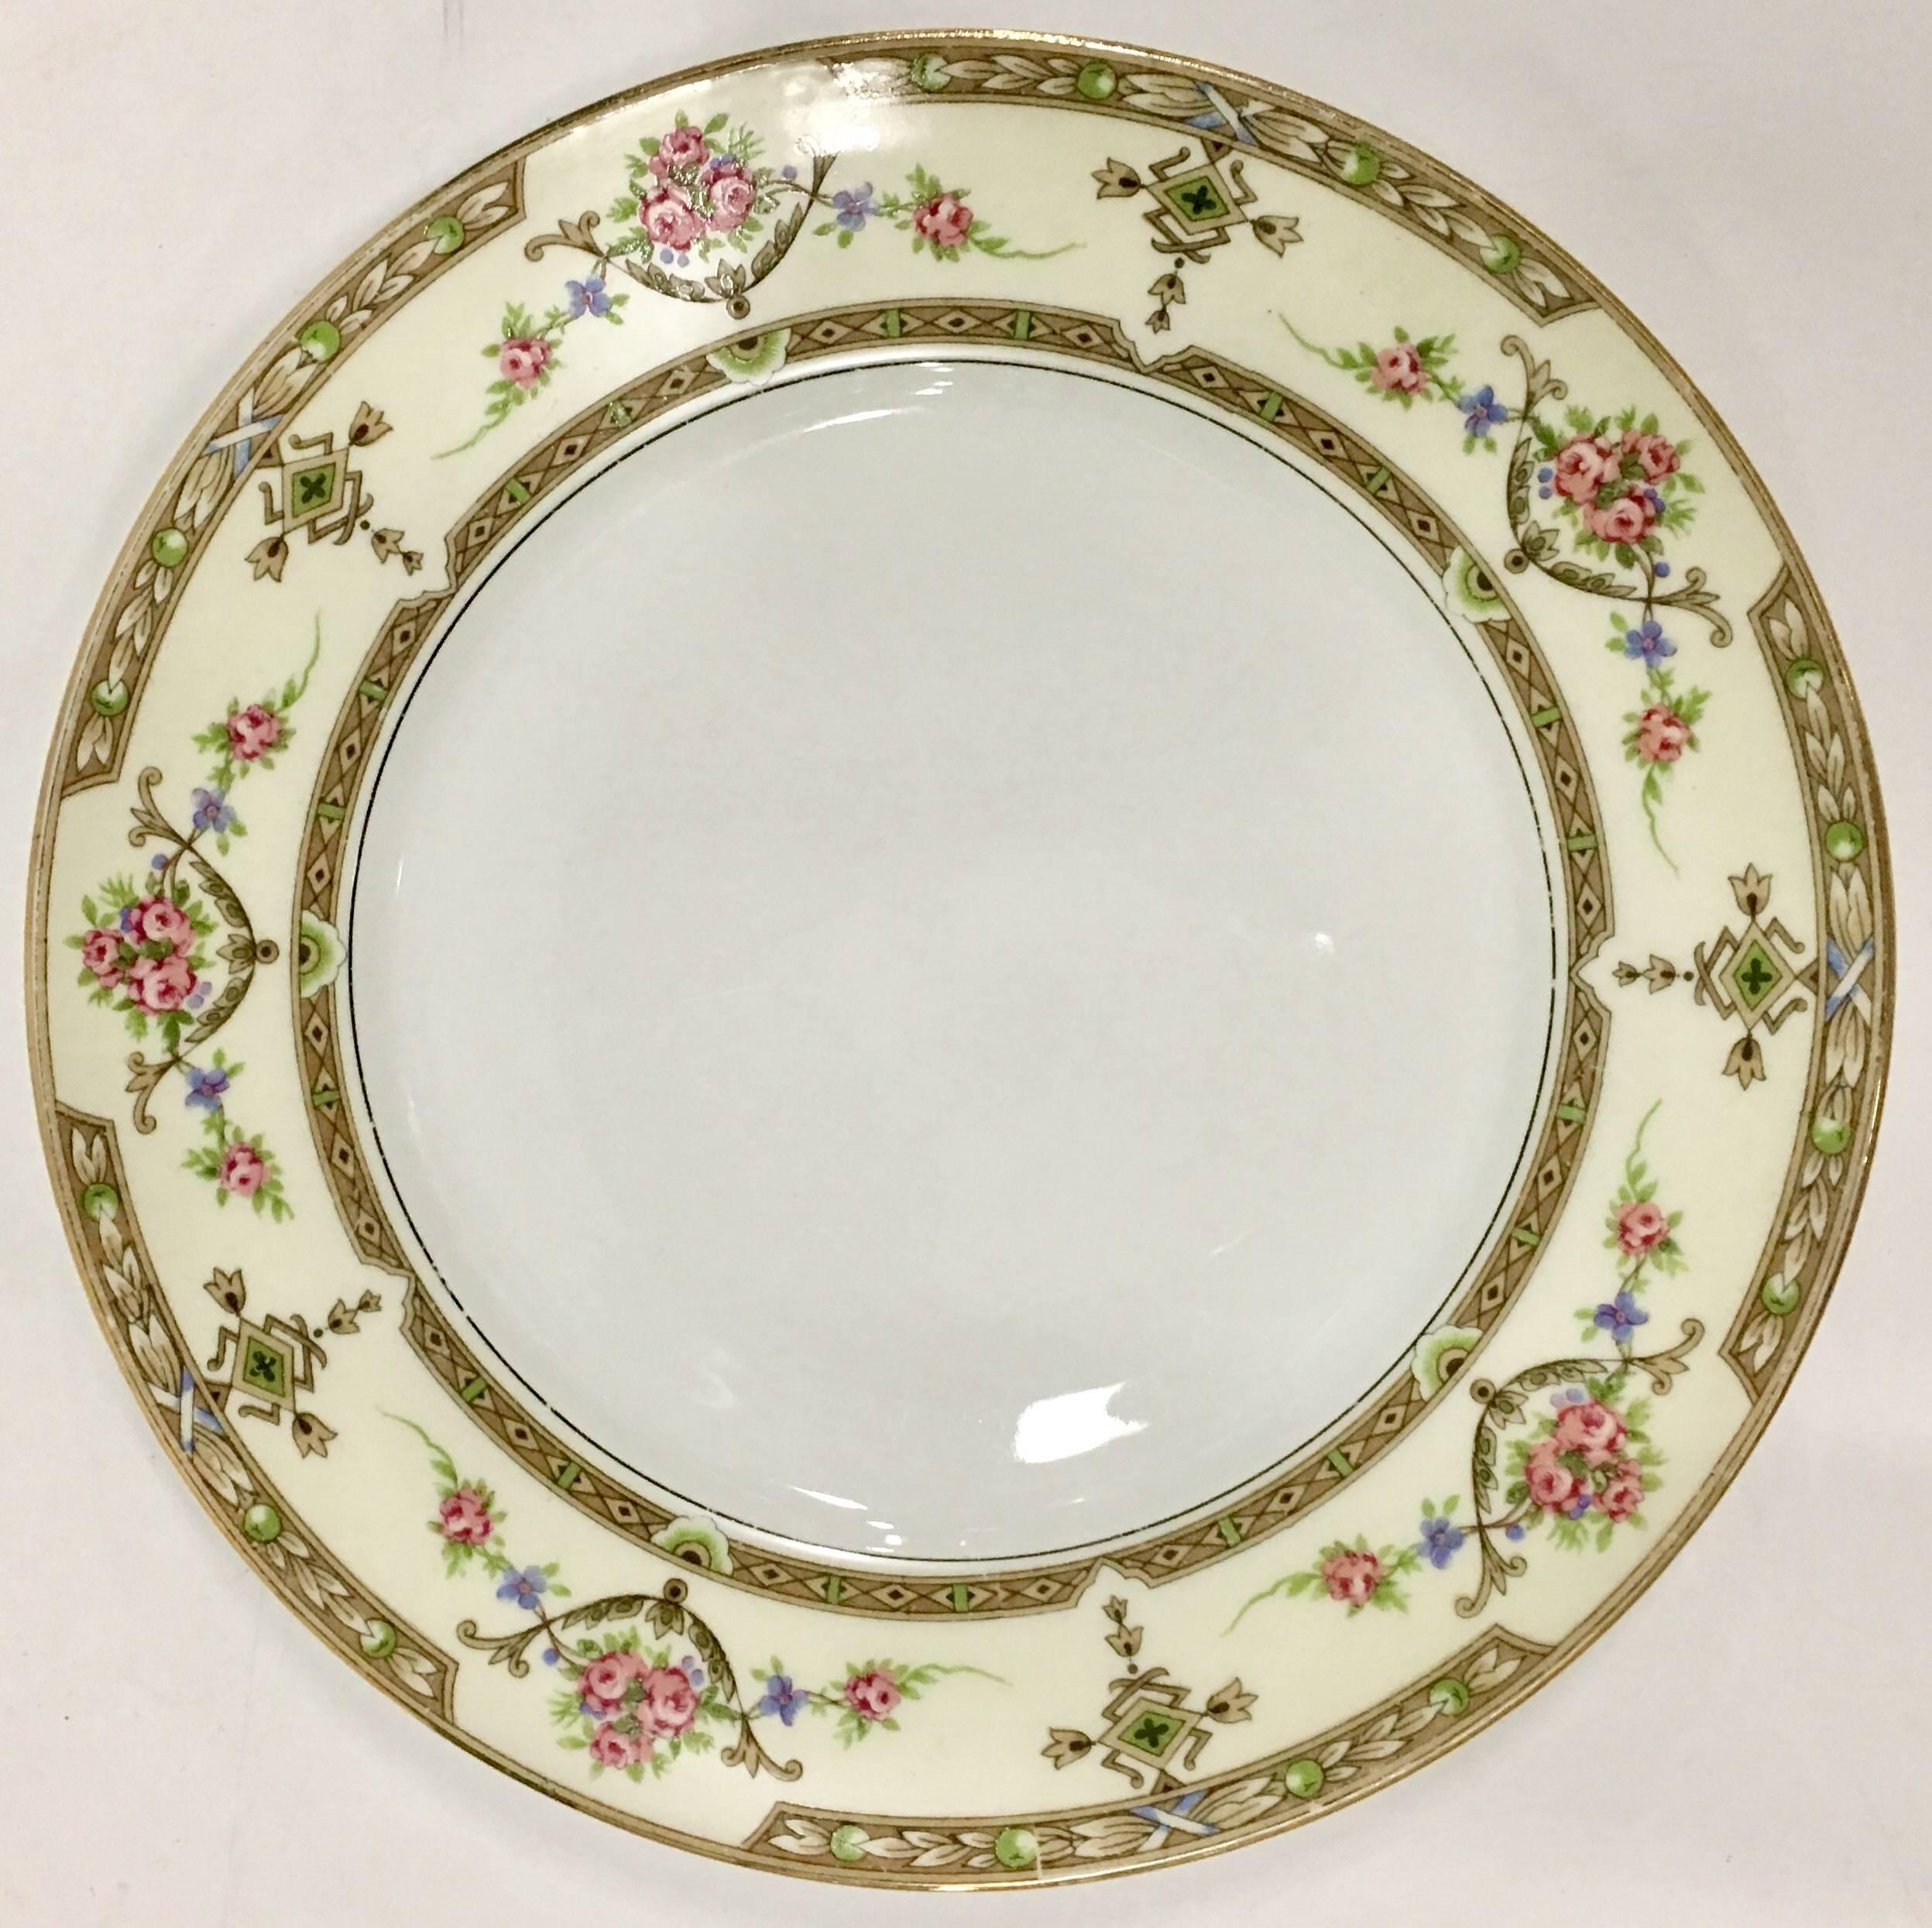 Mid-Century Art Nouveau style French porcelain dinnerware in the pattern, "Lafayette" by, U.C. Limoges France. This 14 piece set features a floral and geometric edge pattern on a cream ground. The centre well of each piece is bright white.